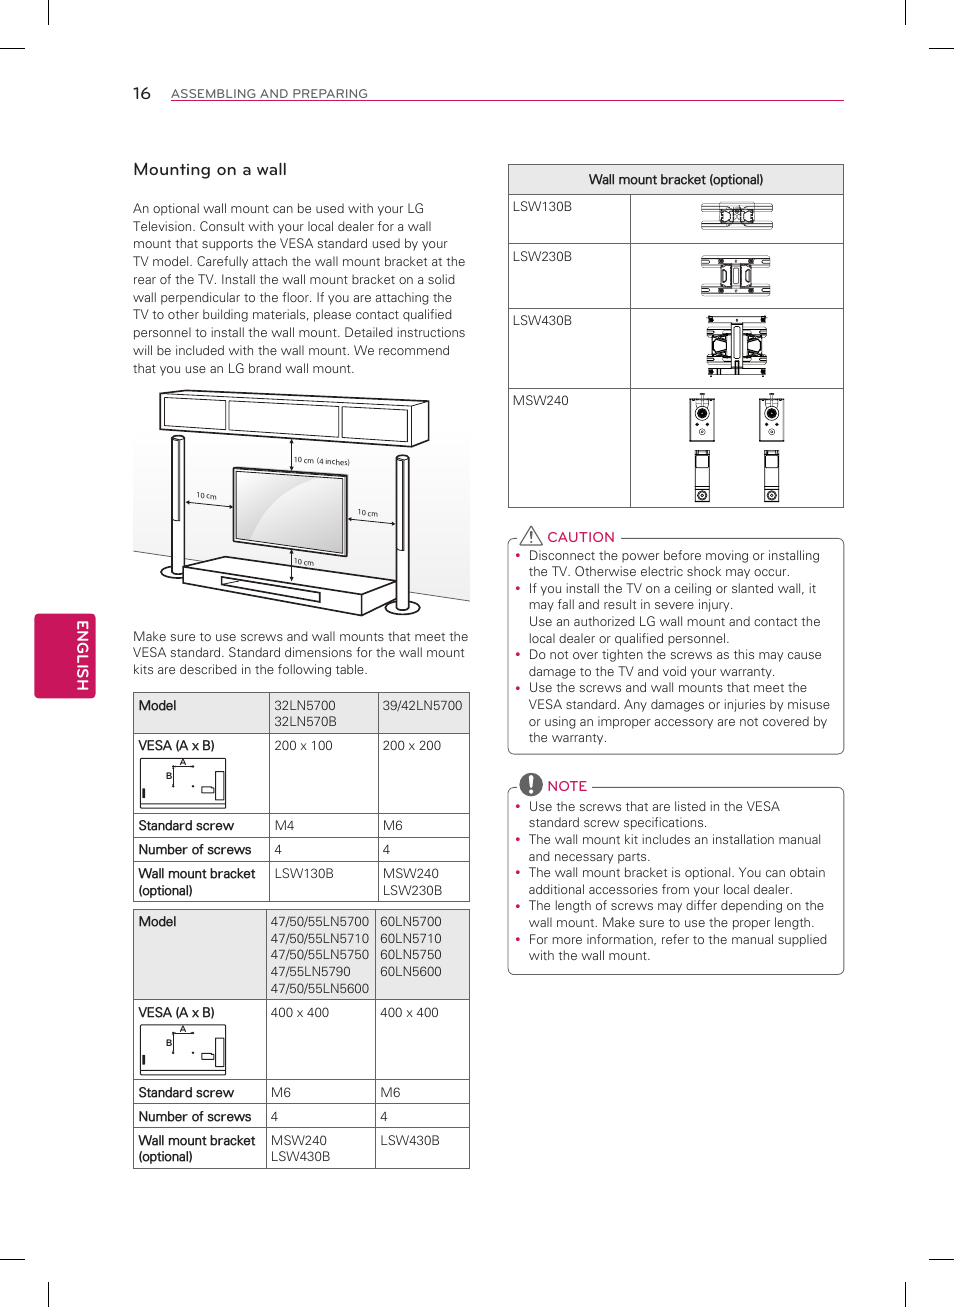 Mounting on a wall | LG 50LN5700 User Manual | Page 16 / 52